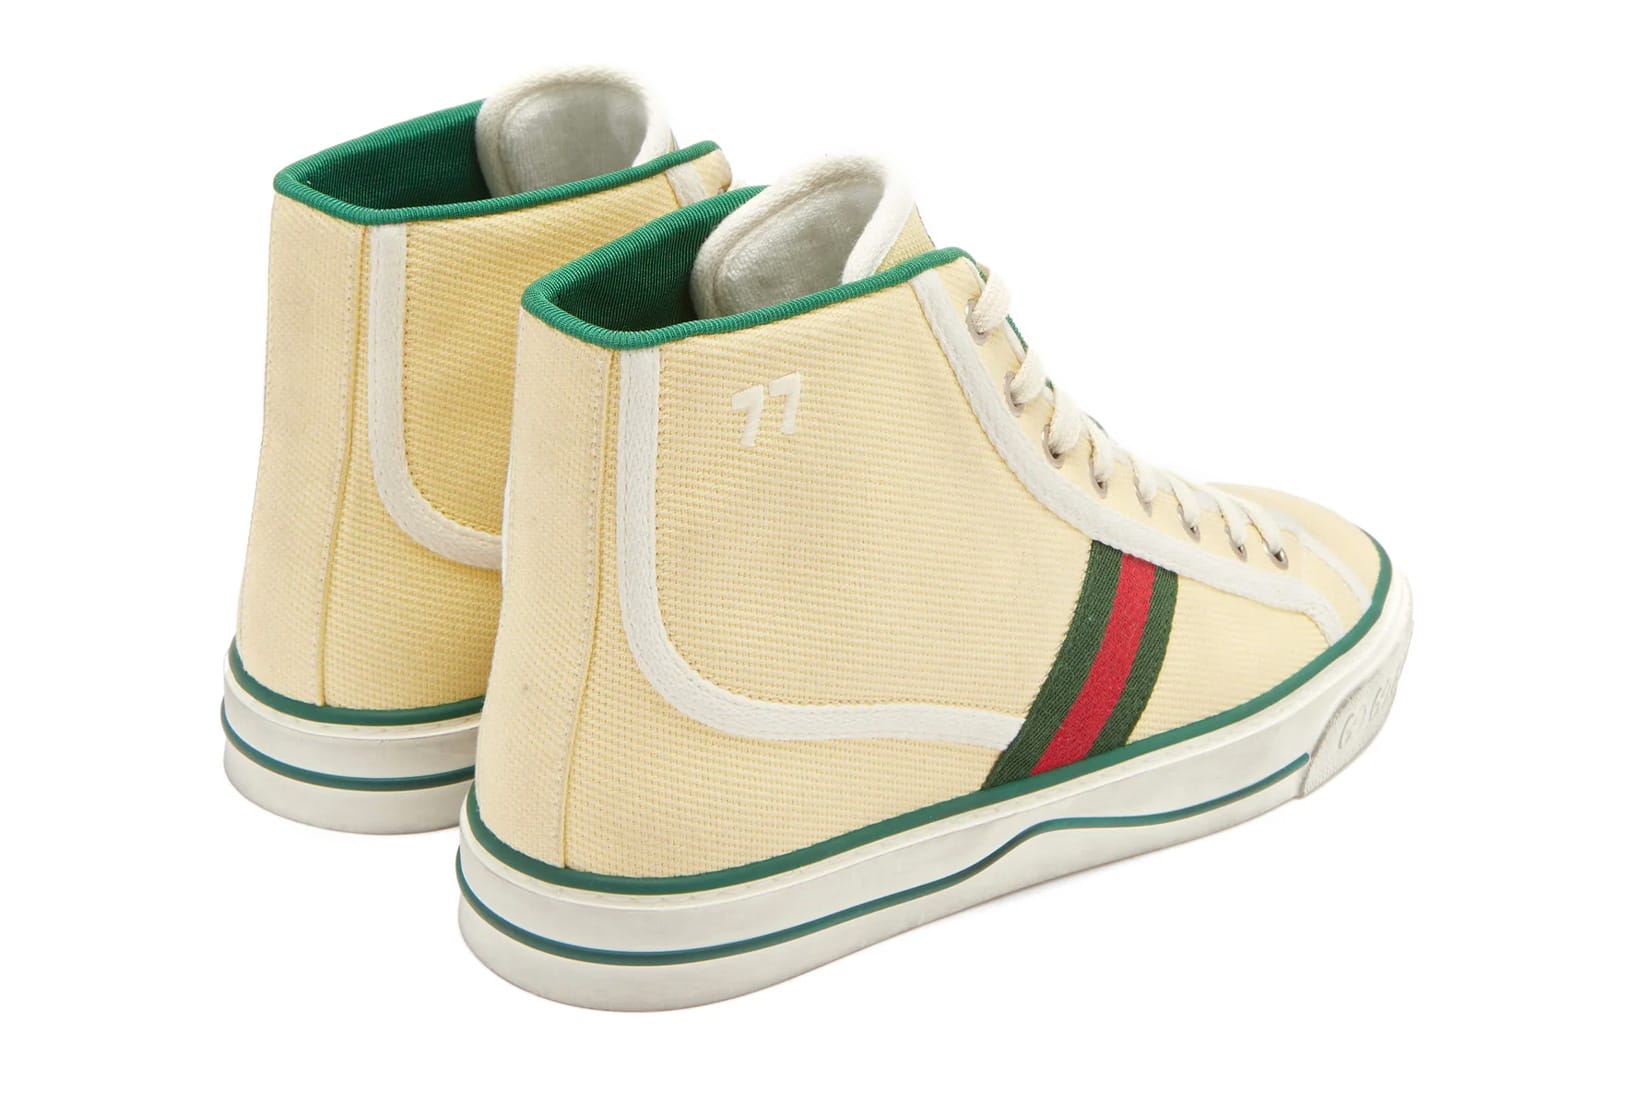 gucci canvas high top sneakers